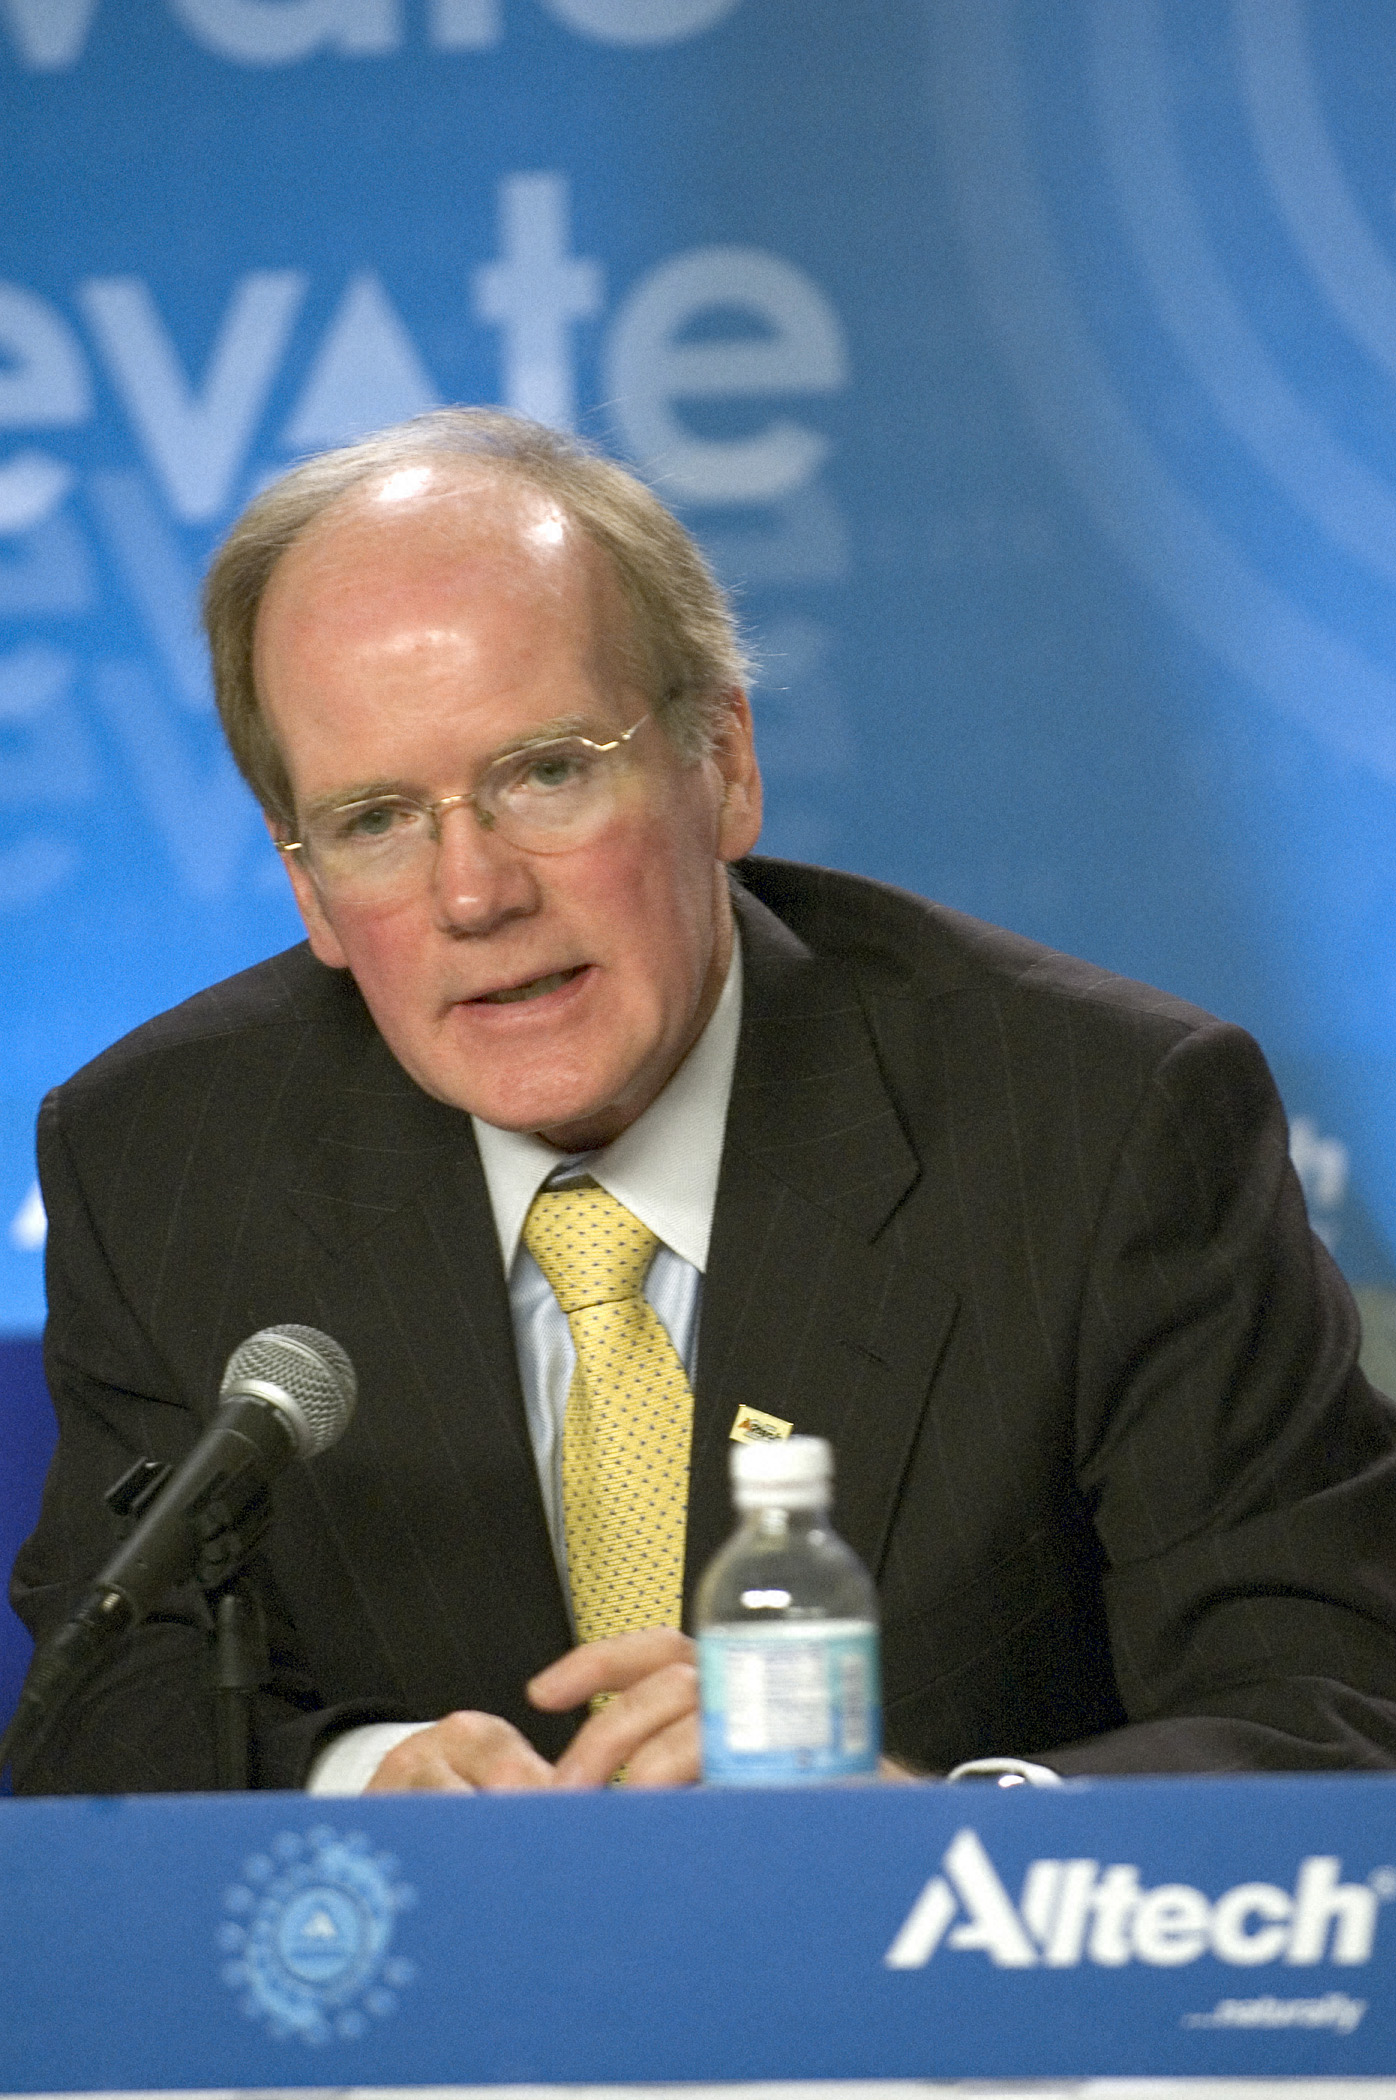 Dr. Pearse Lyons makes a point at a press conference during Alltech's 2005 International Symposium